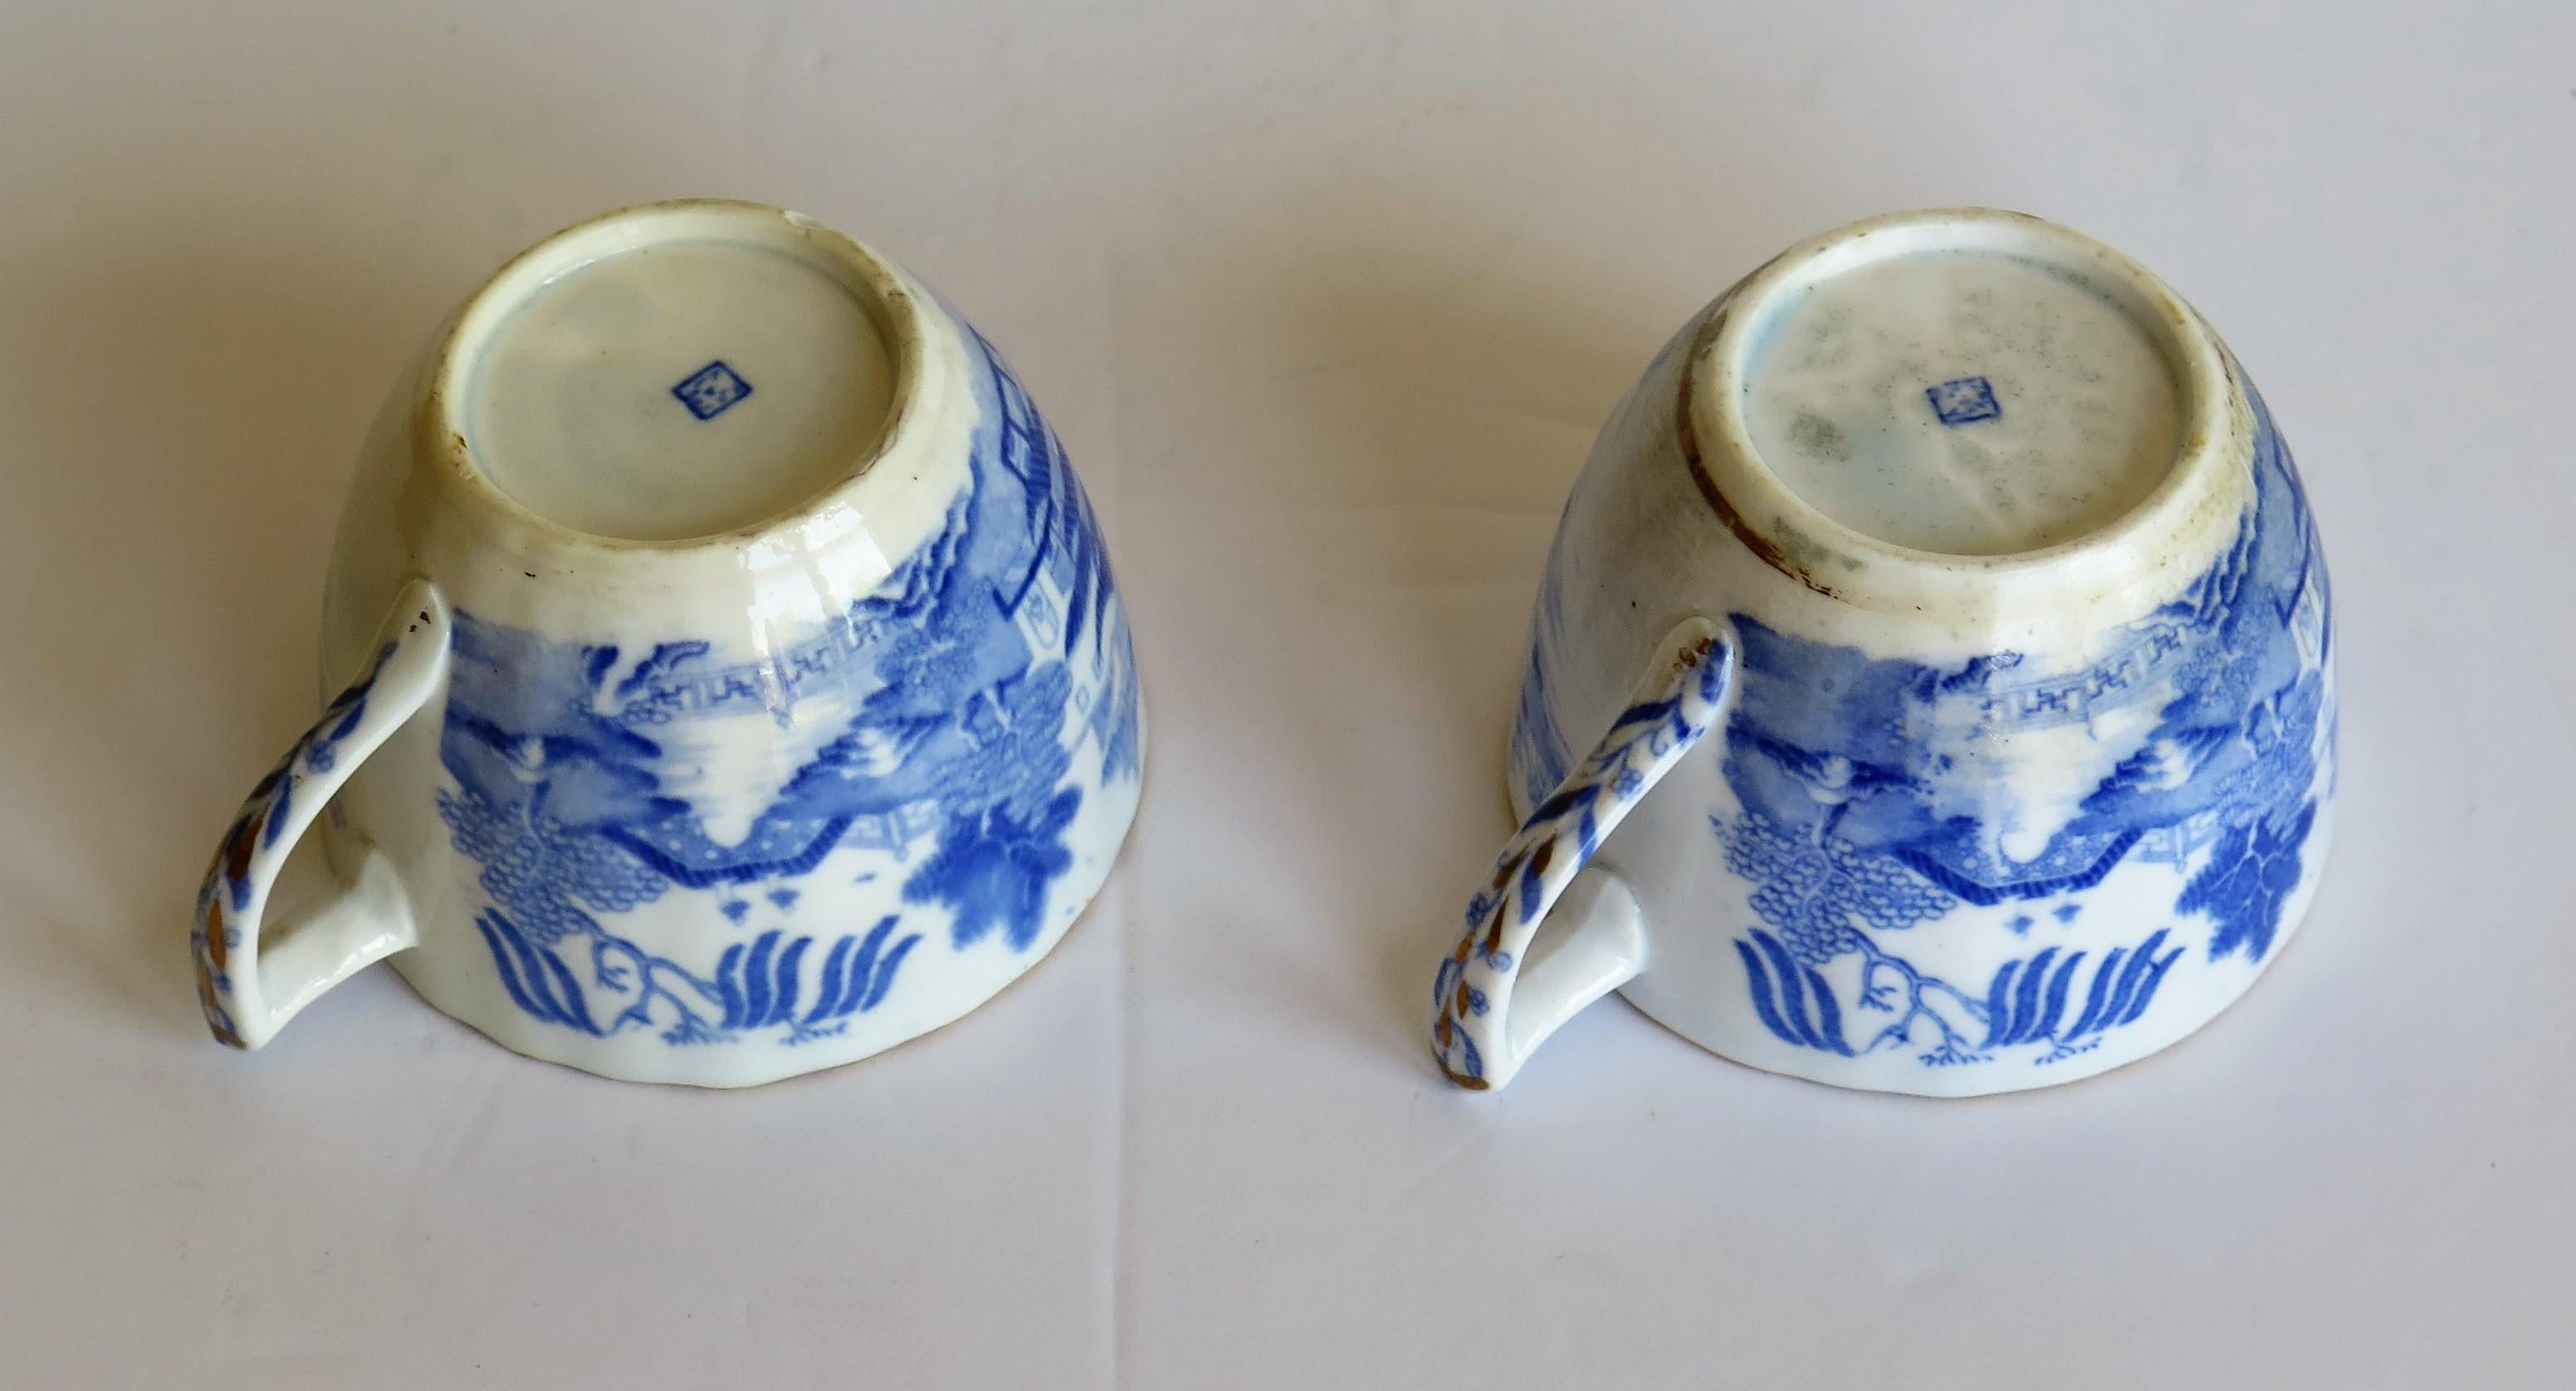 Miles Mason Porcelain Pair of Tea Cups Broseley Blue and White Pattern, Ca. 1805 For Sale 3